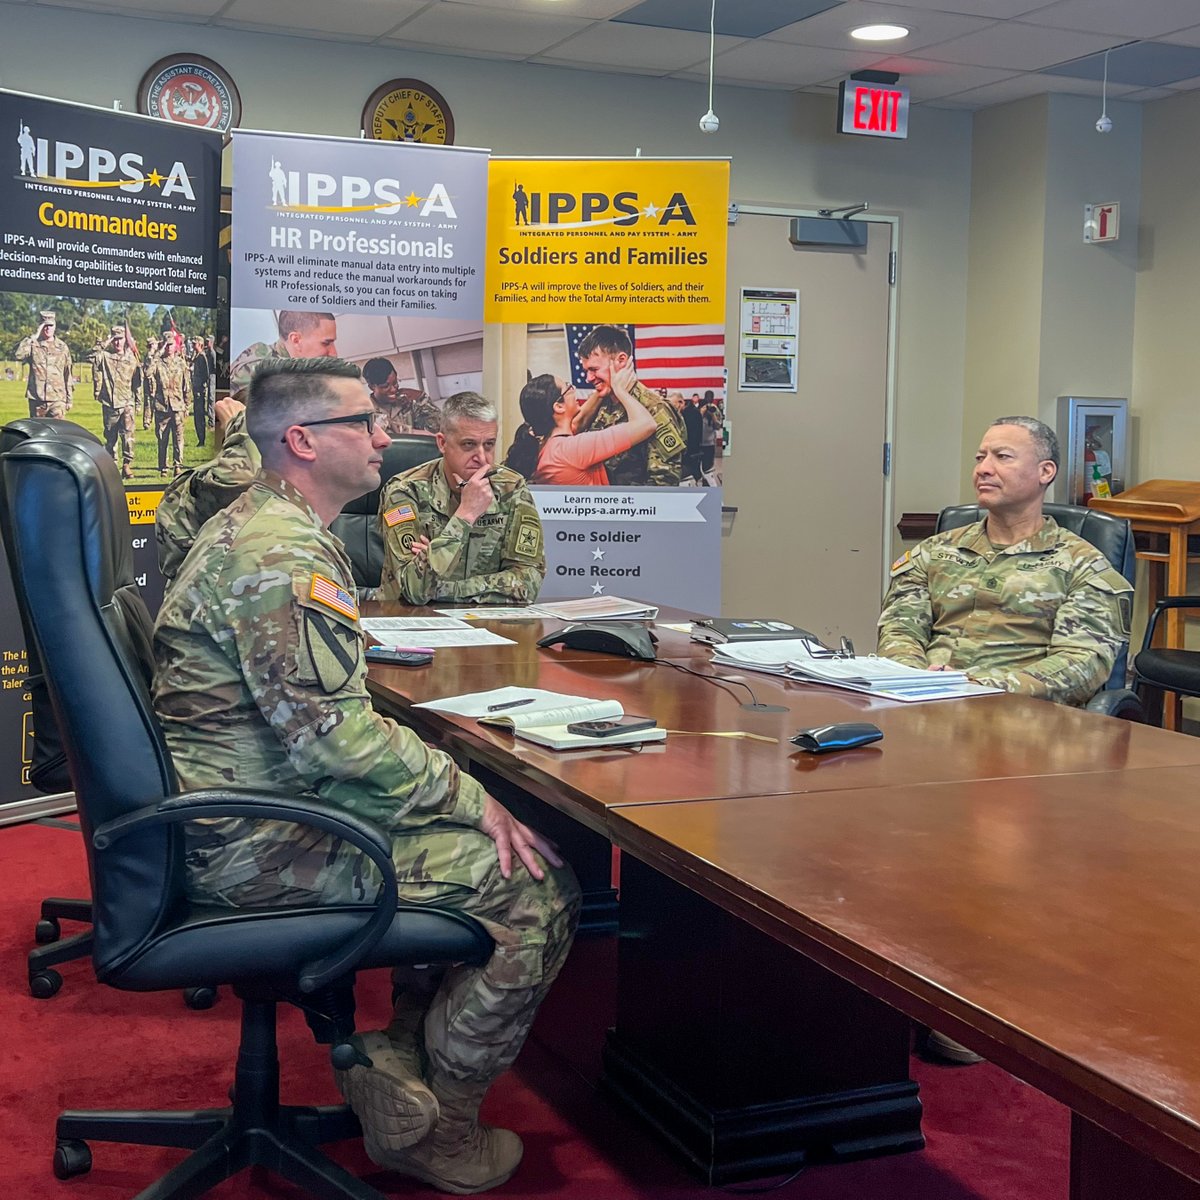 LTG Douglas F. Stitt, Deputy Chief of Staff, G-1; SGM Christopher P. Stevens, Deputy Chief of Staff, G-1 SGM; and Team IPPS-A conducted a townhall this week with 1- and 2-star Generals. They discussed the importance of IPPS-A integration and collected valuable feedback.